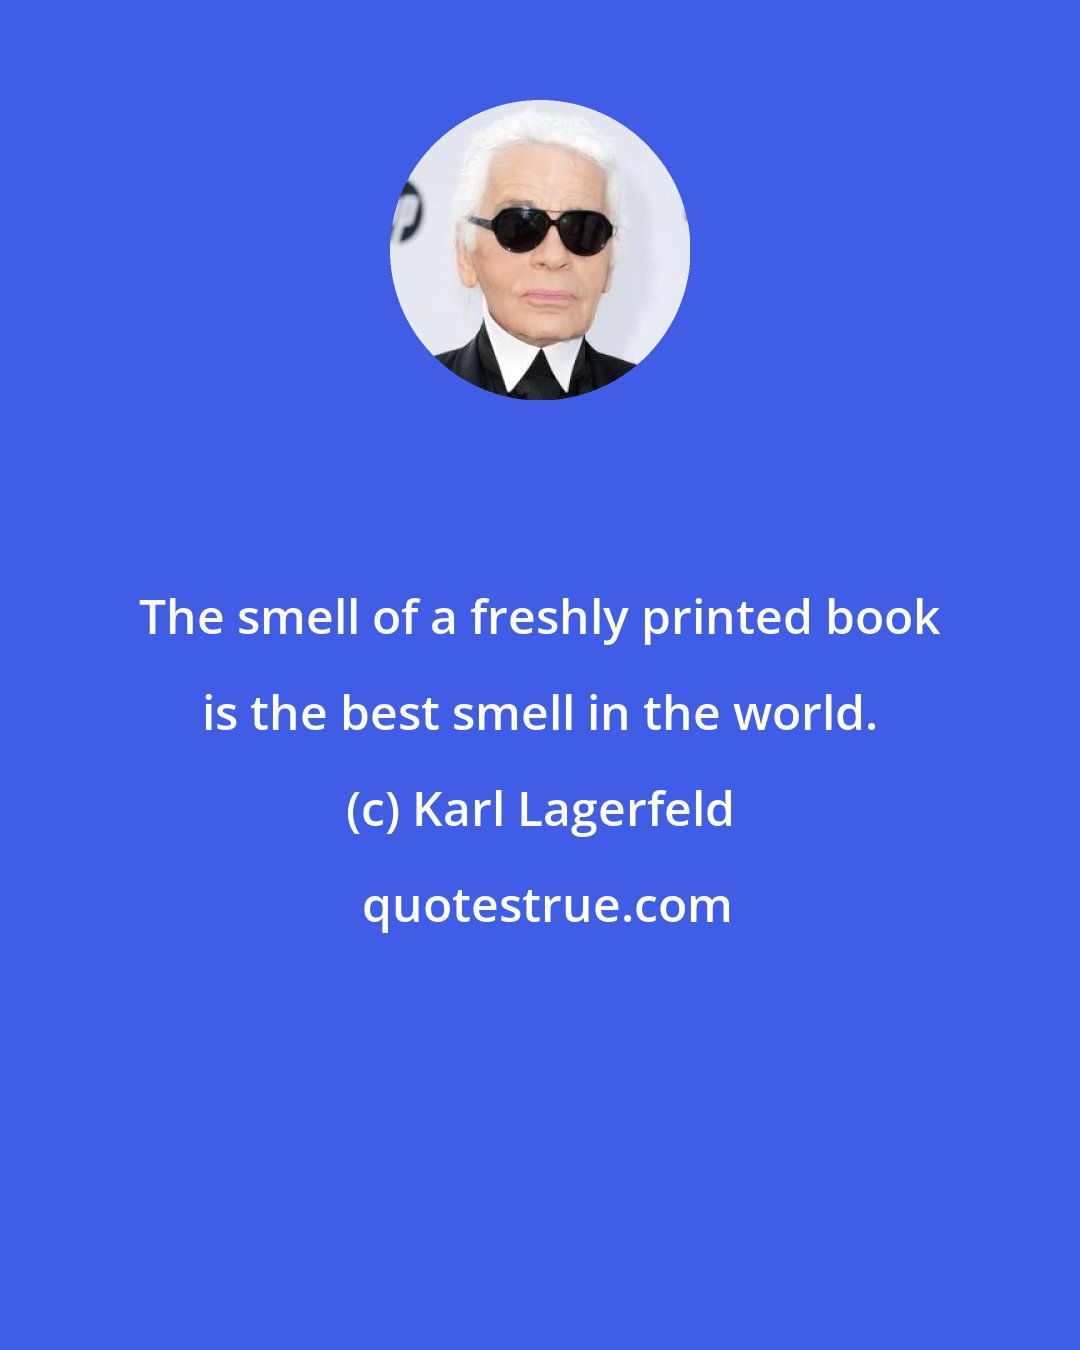 Karl Lagerfeld: The smell of a freshly printed book is the best smell in the world.